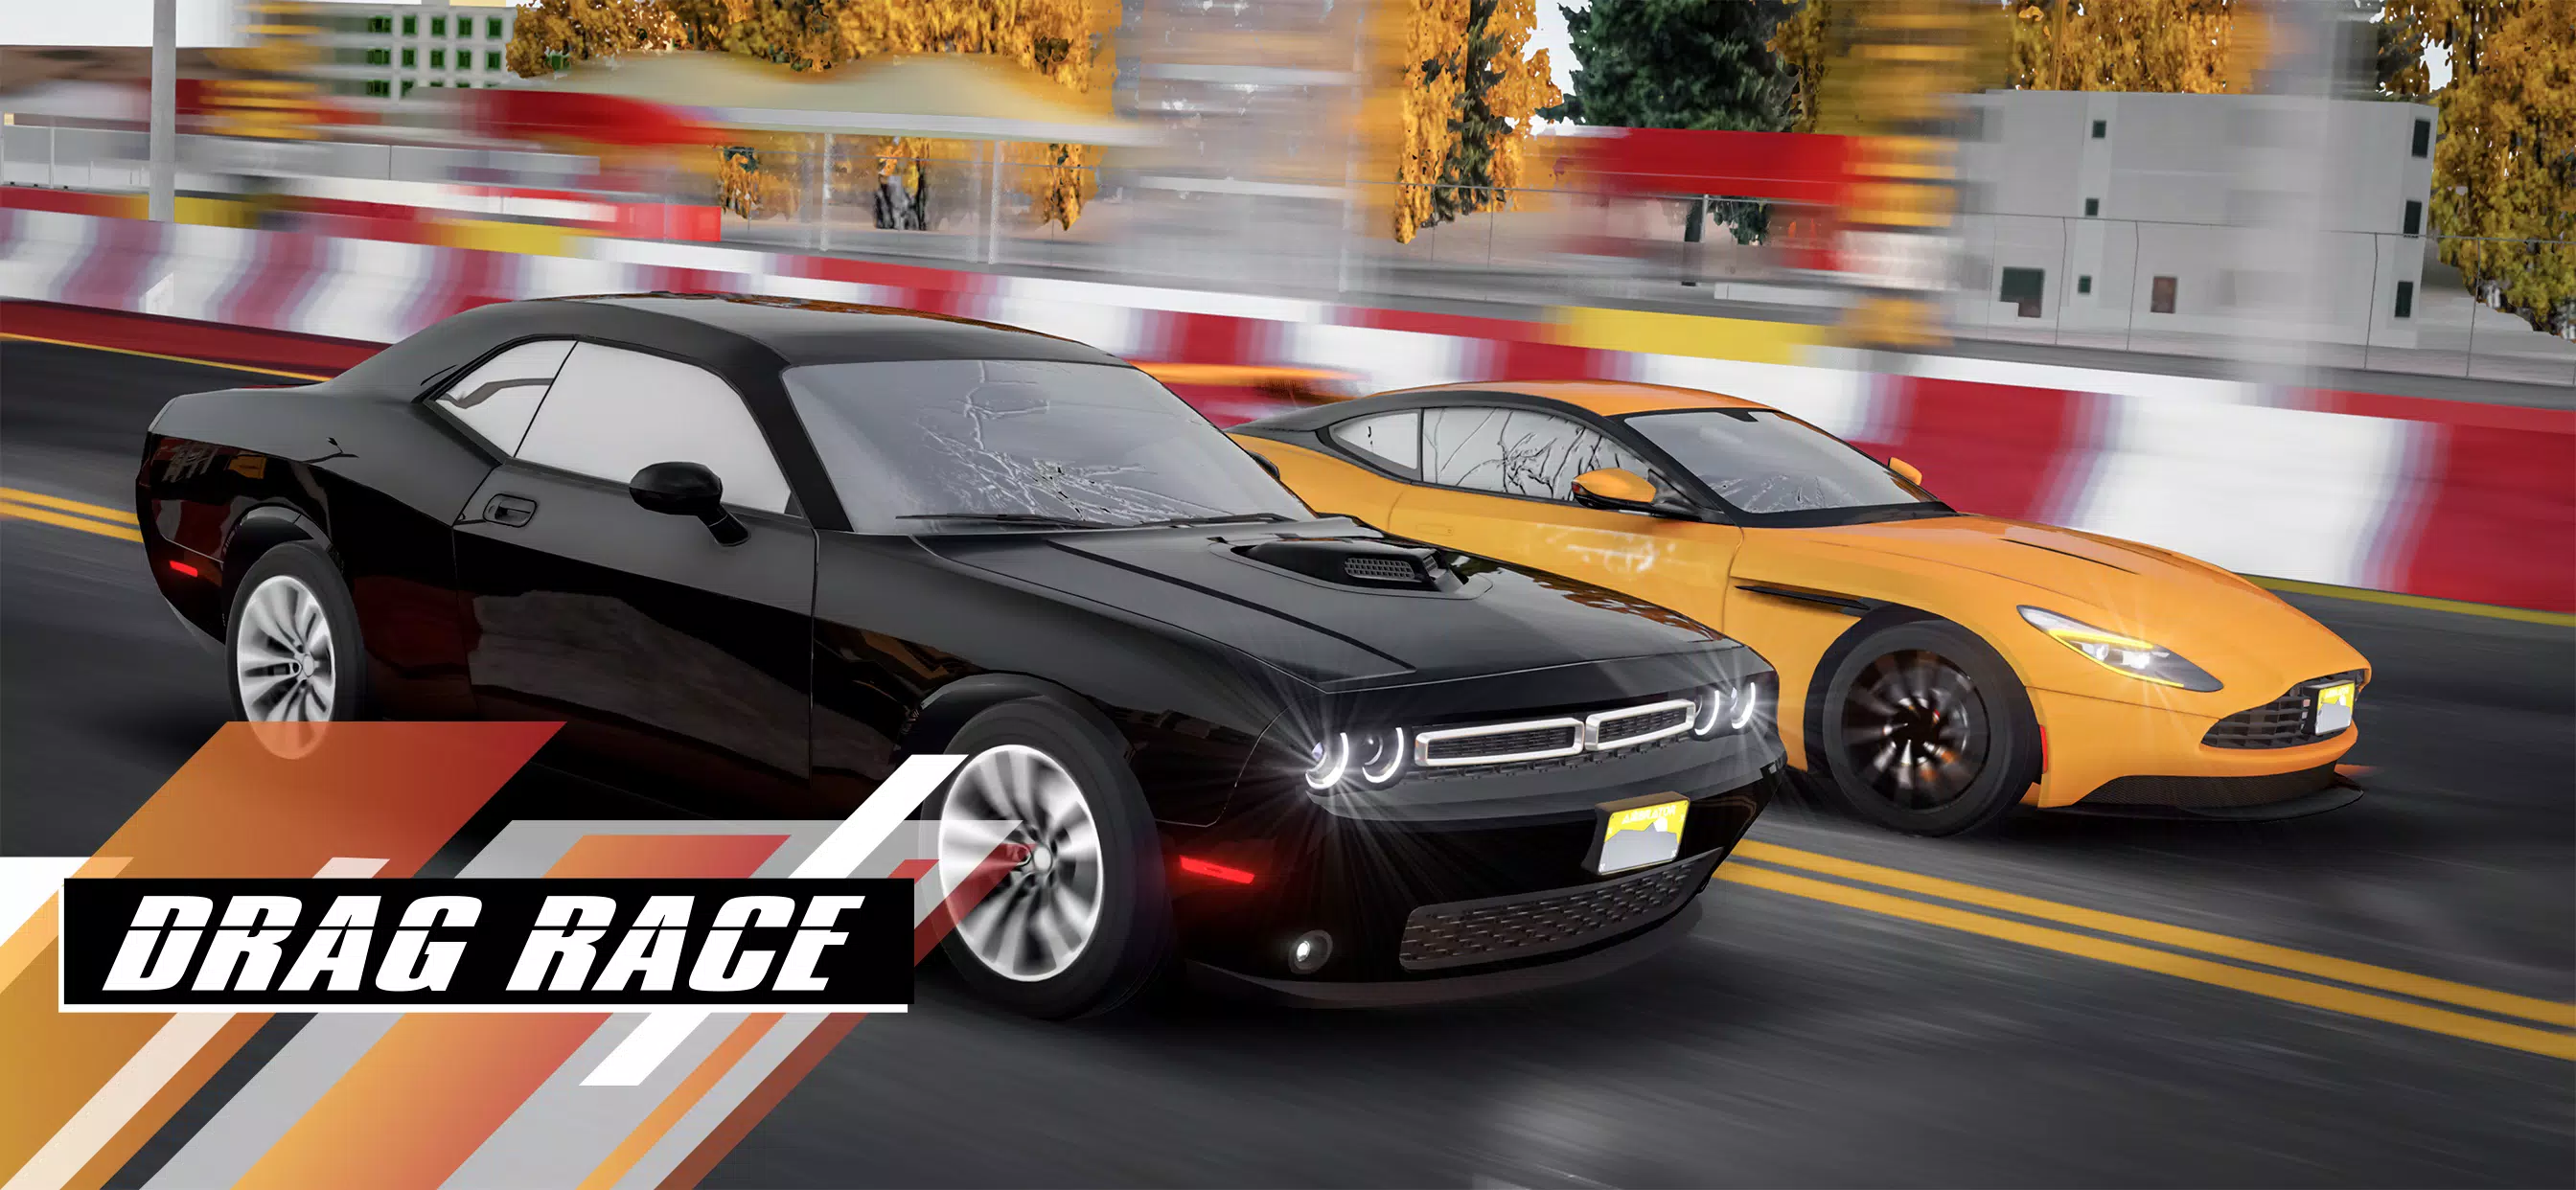 Drift for Life for Android - Download the APK from Uptodown